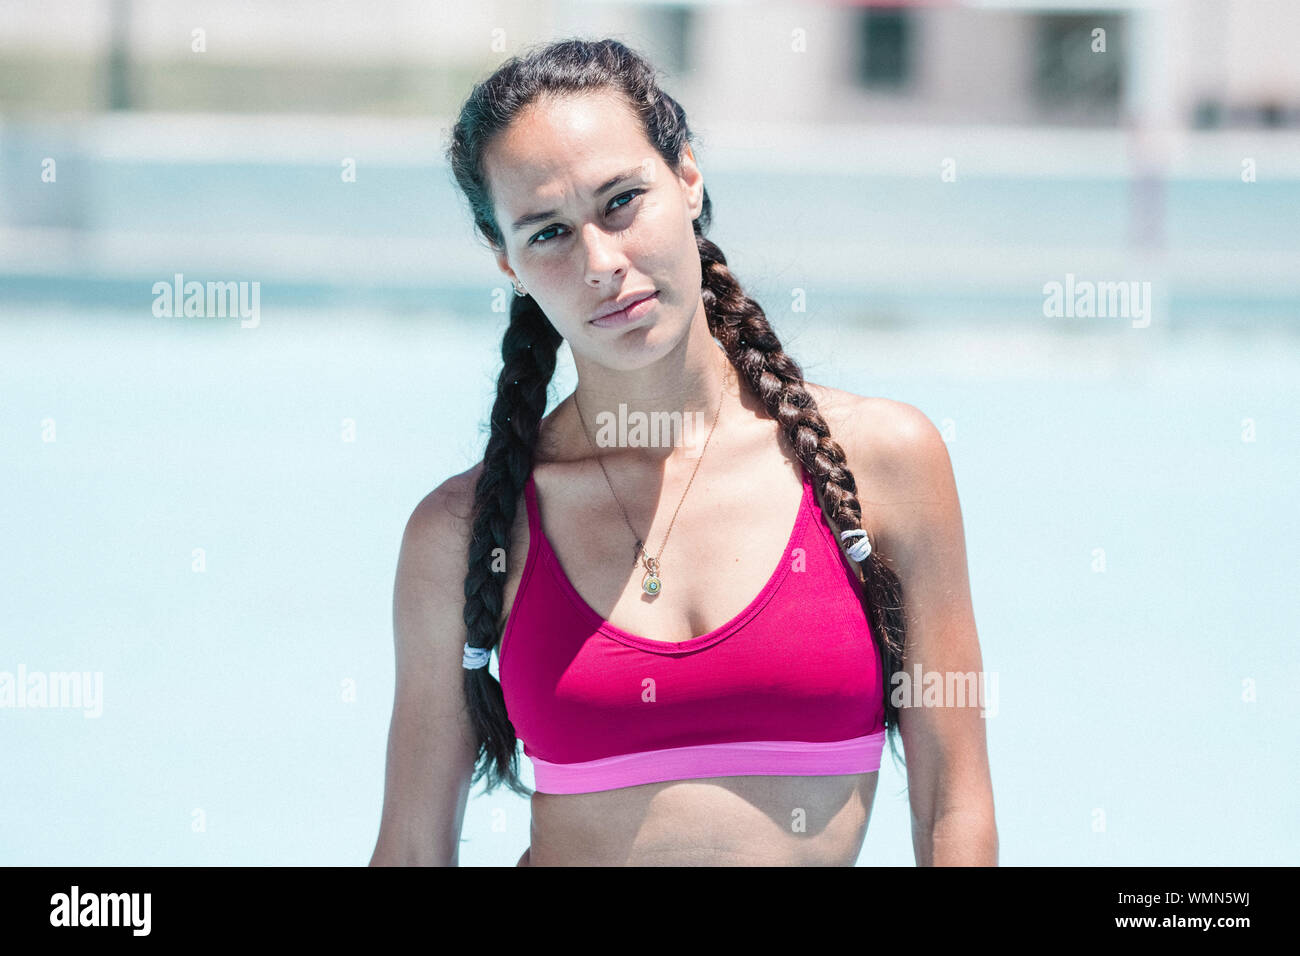 Colorful image of portrait of upper body of female athlete Stock Photo